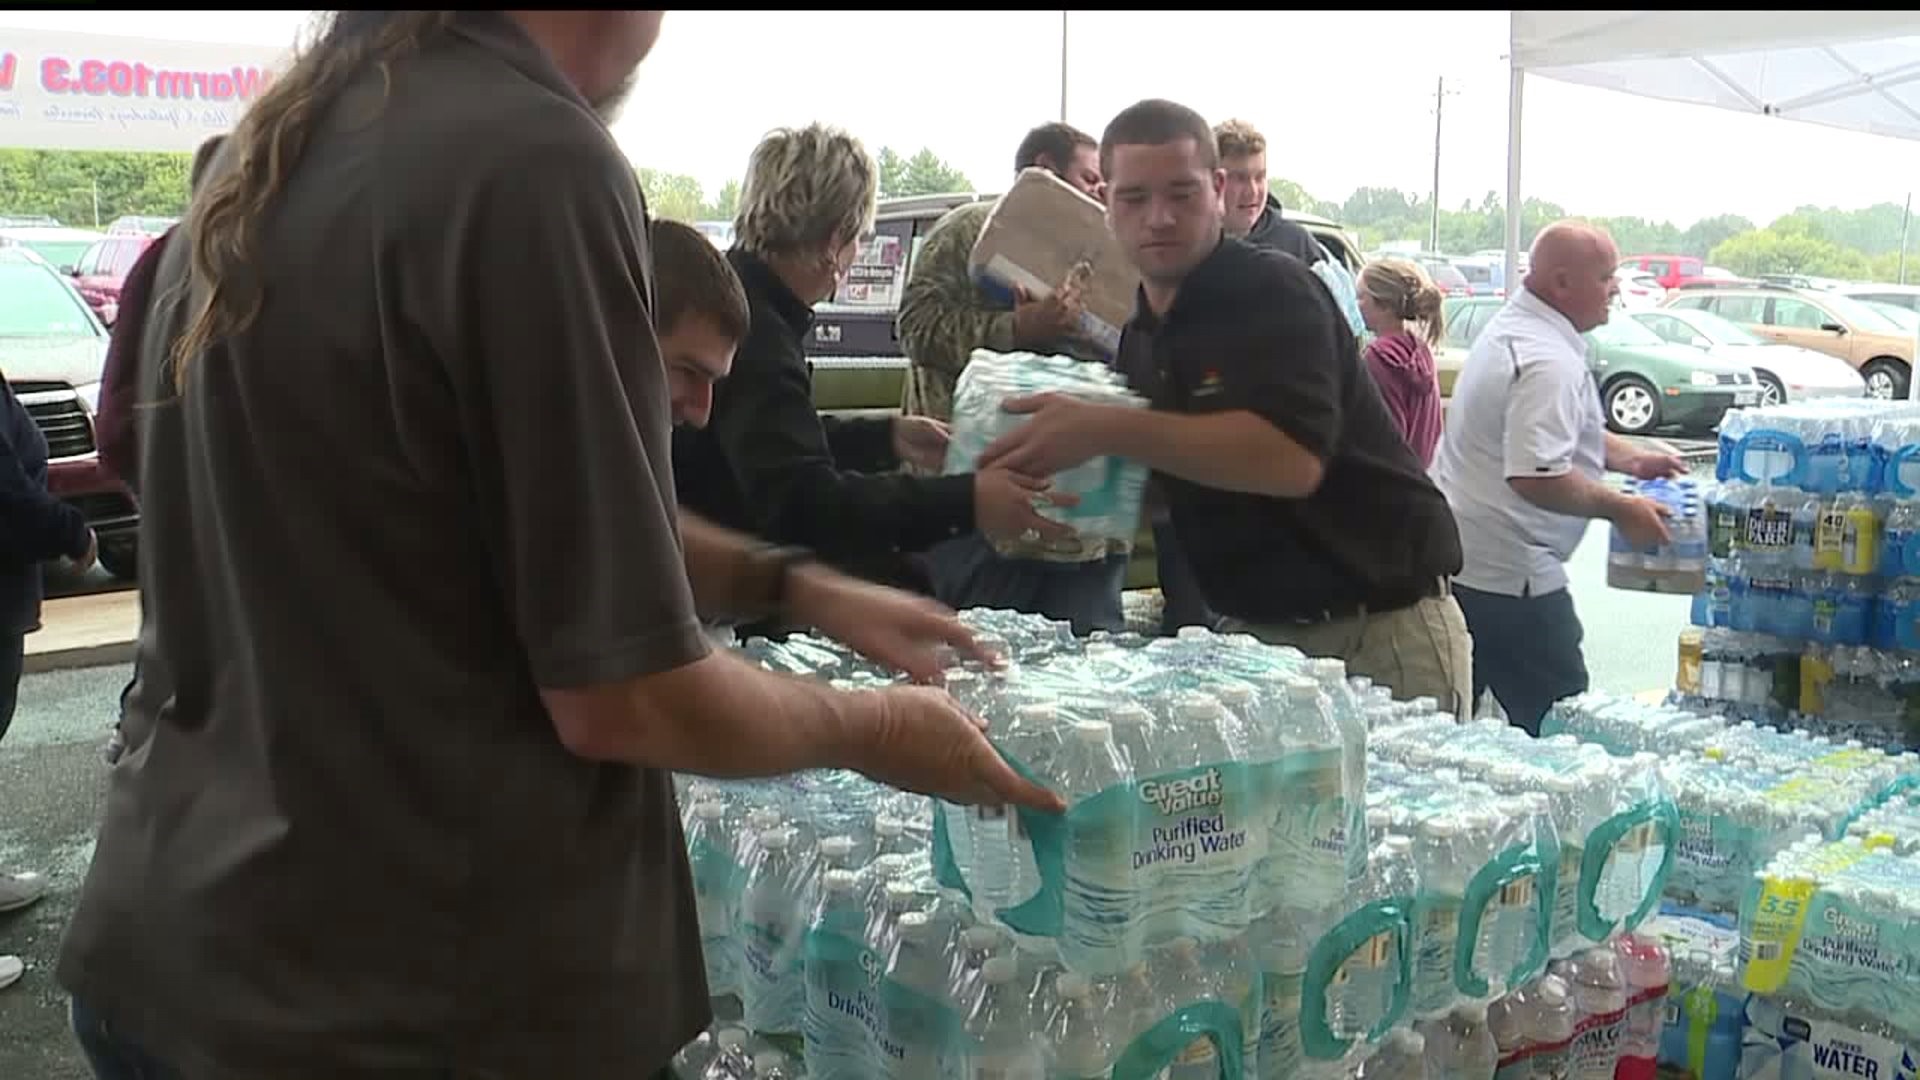 Lancaster County community helps fill truck with water for Hurricane victims